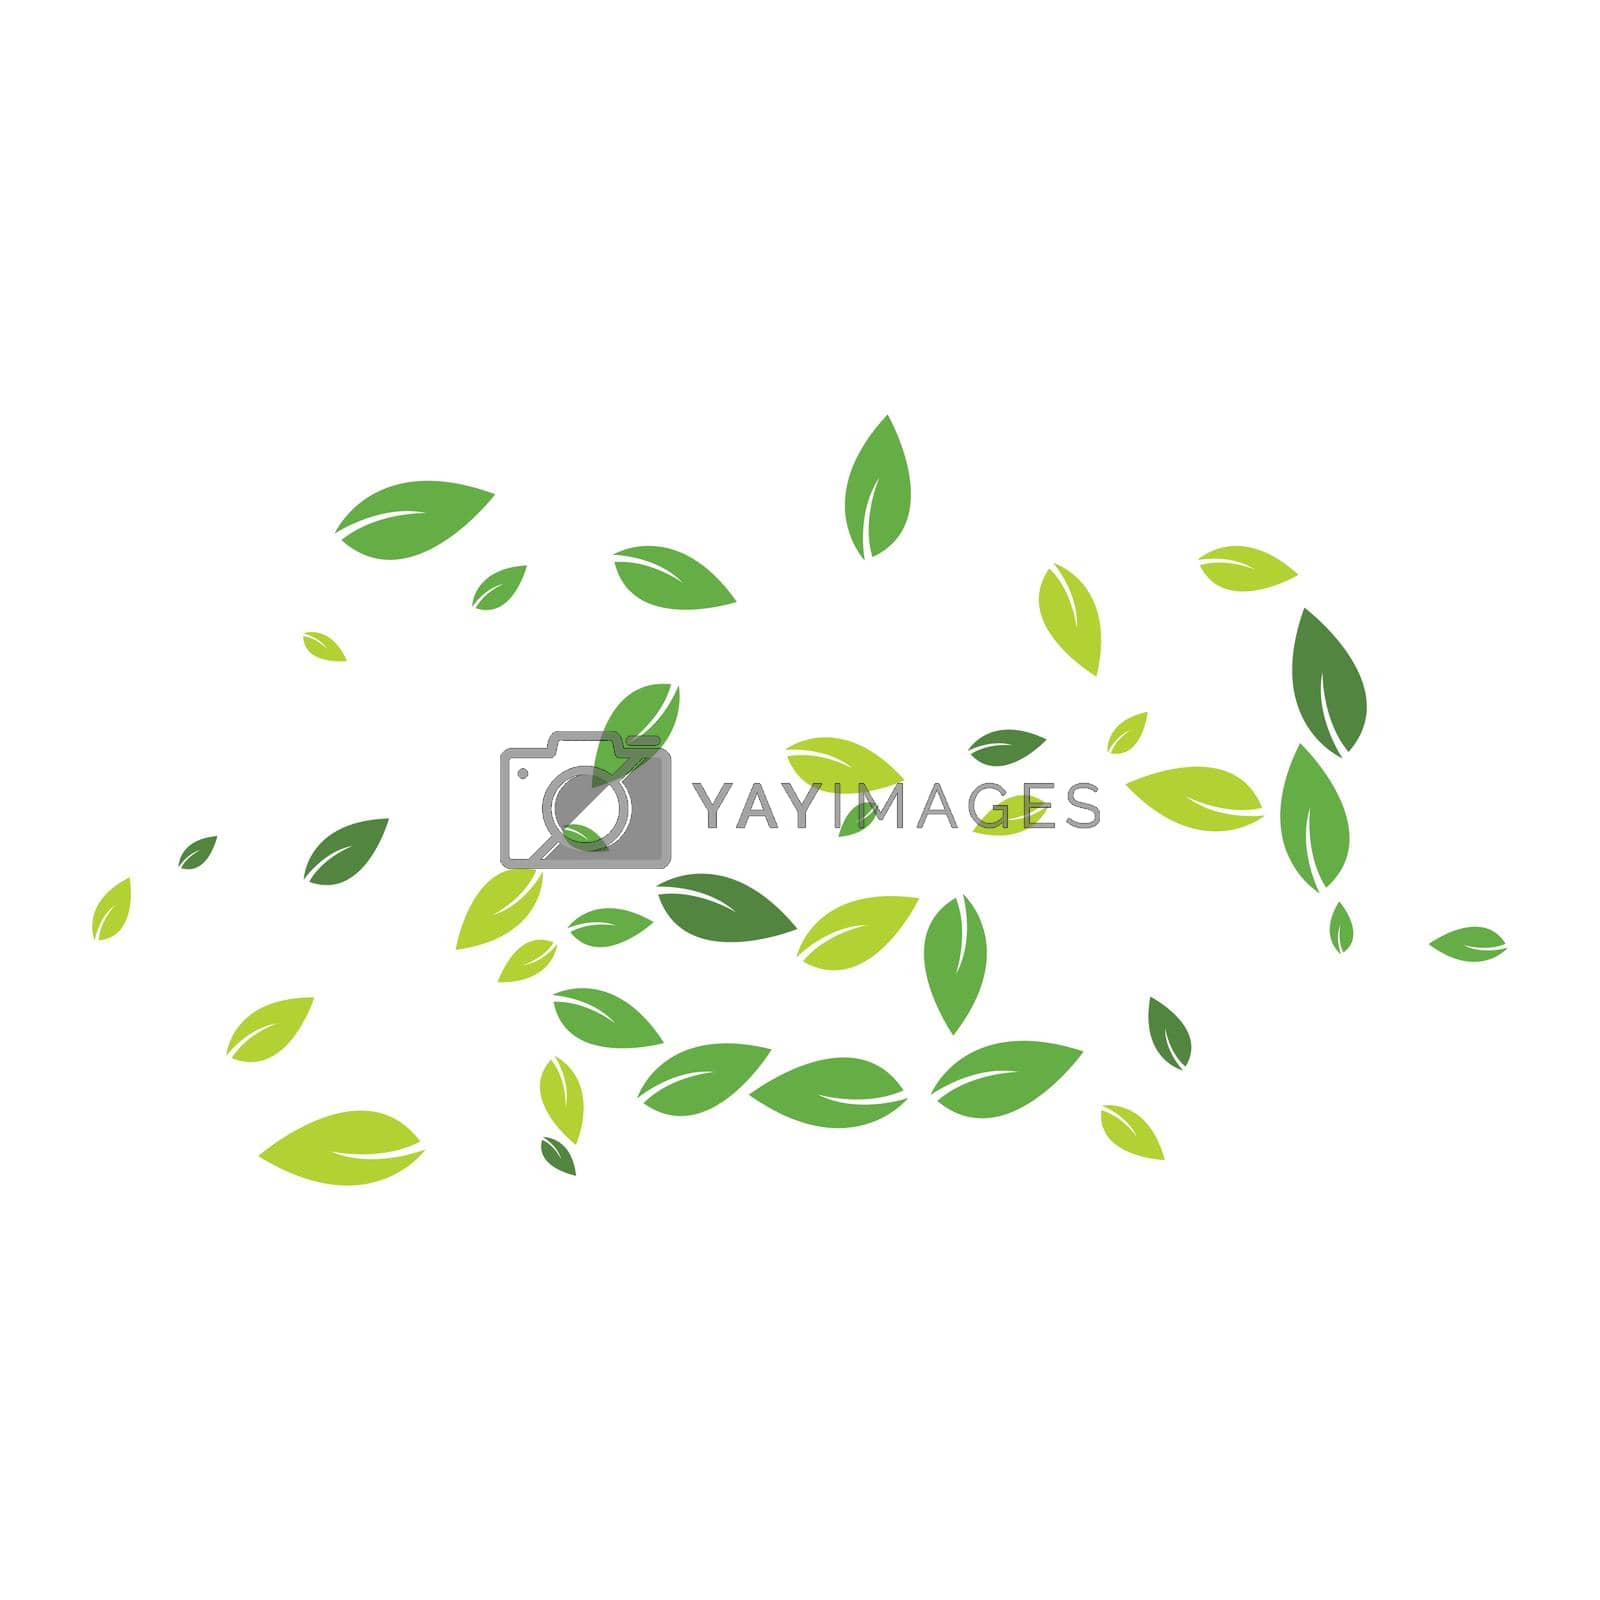 Royalty free image of Green leaves background by awk